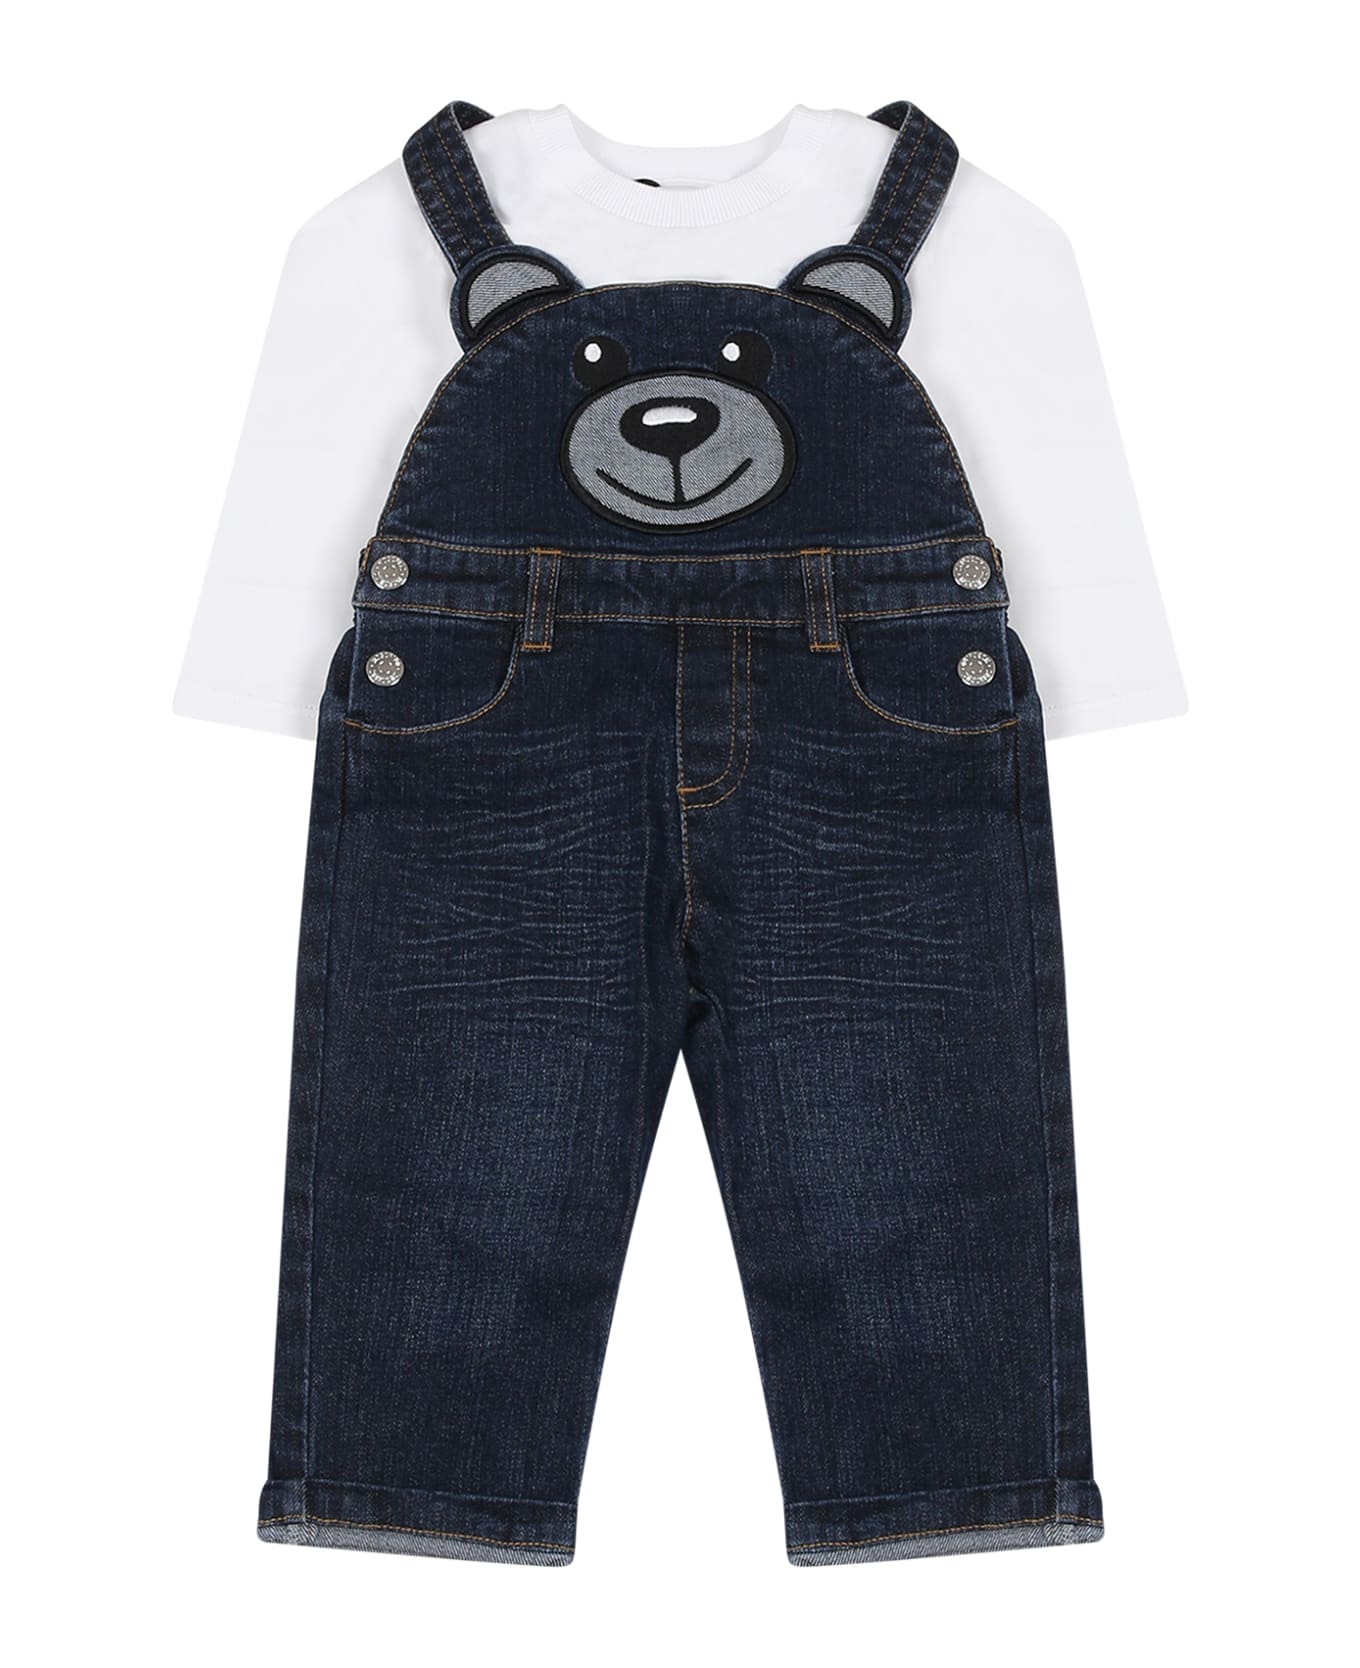 Moschino Blue Suit For Bay Girl With Teddy Bear - DENIM BLUE